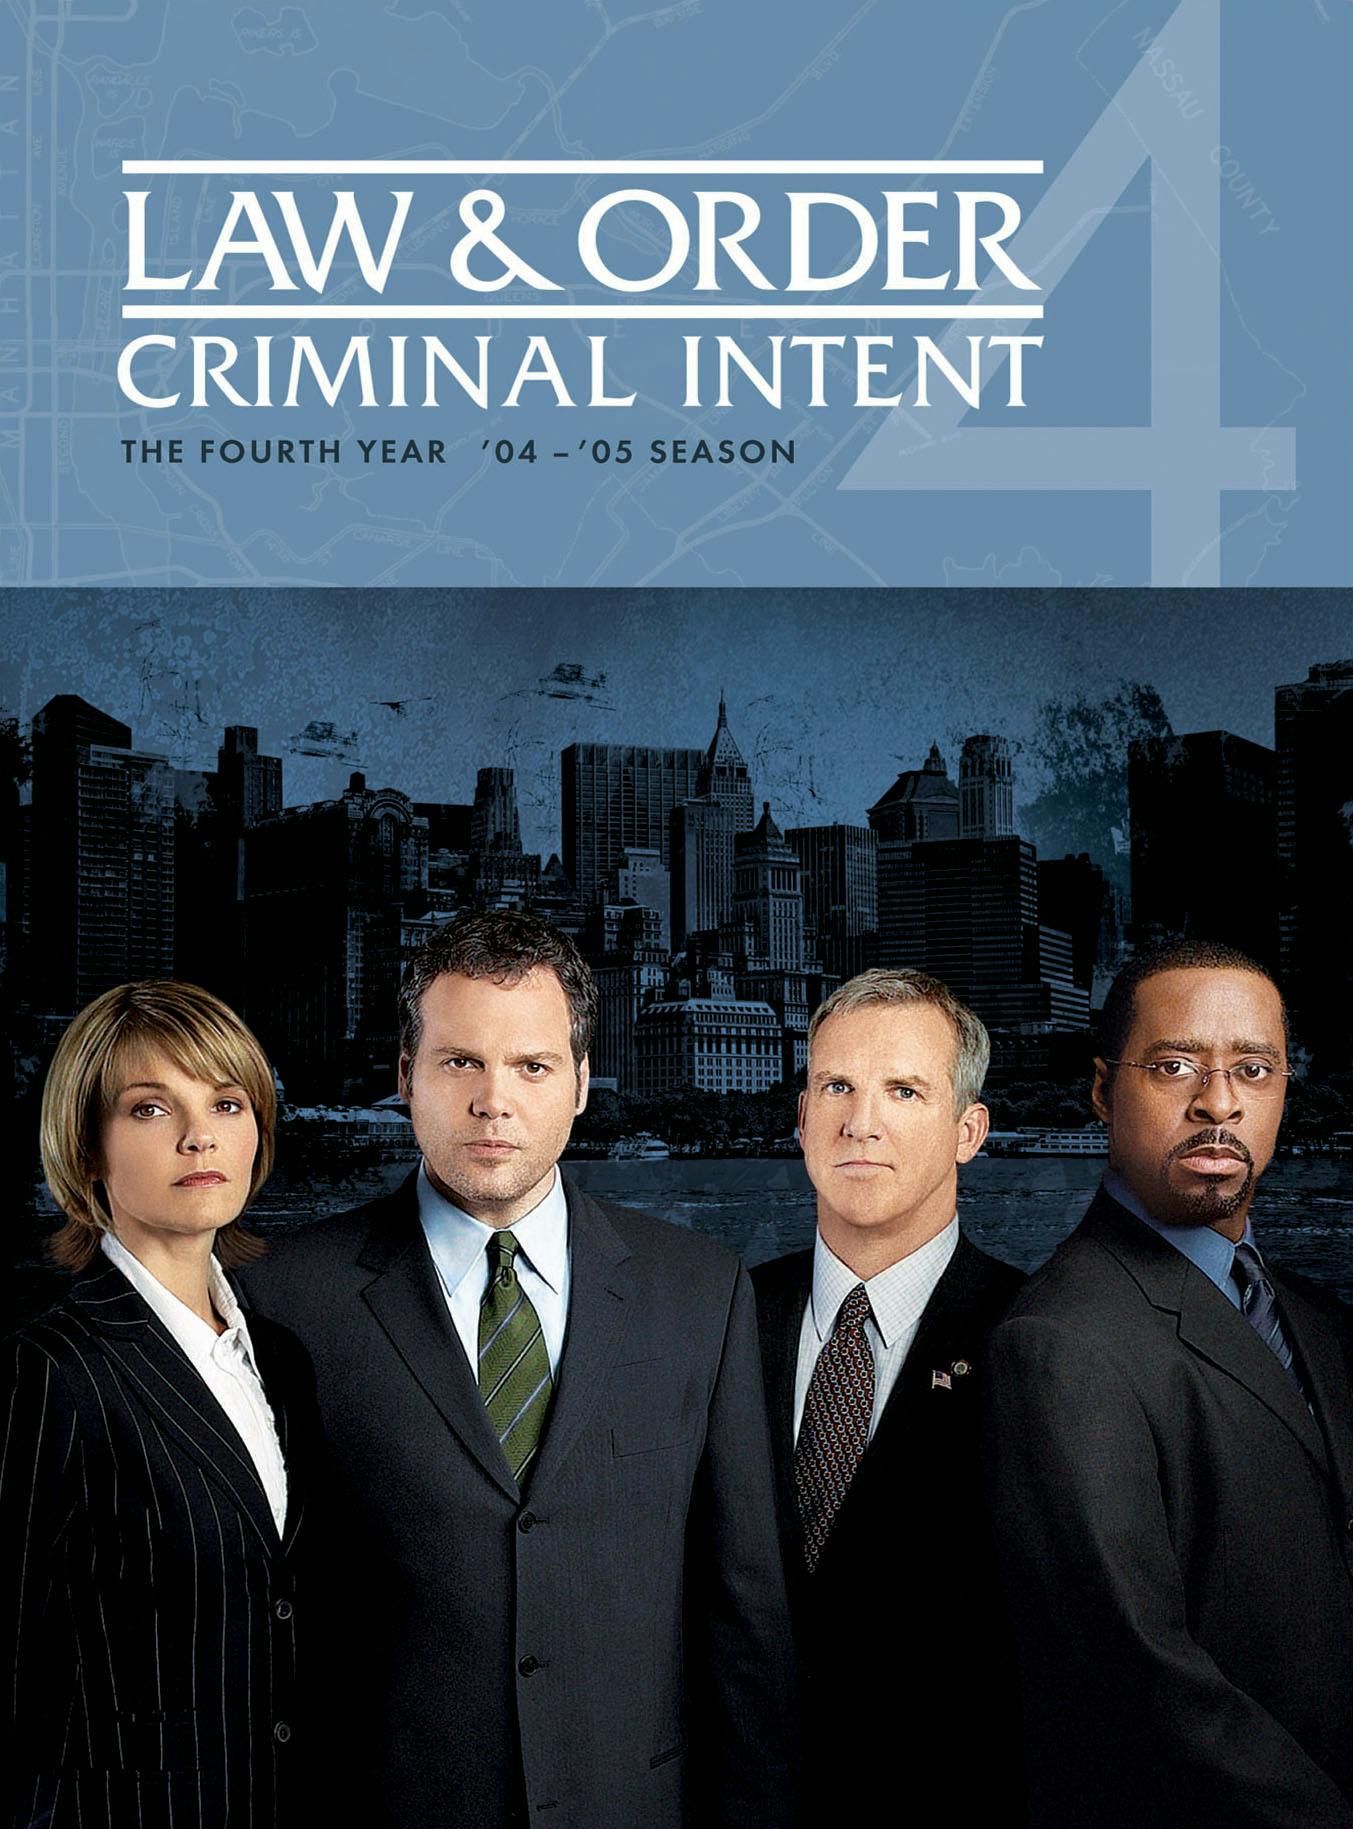 Law & Order - Criminal Intent: The Fourth Year [DVD]